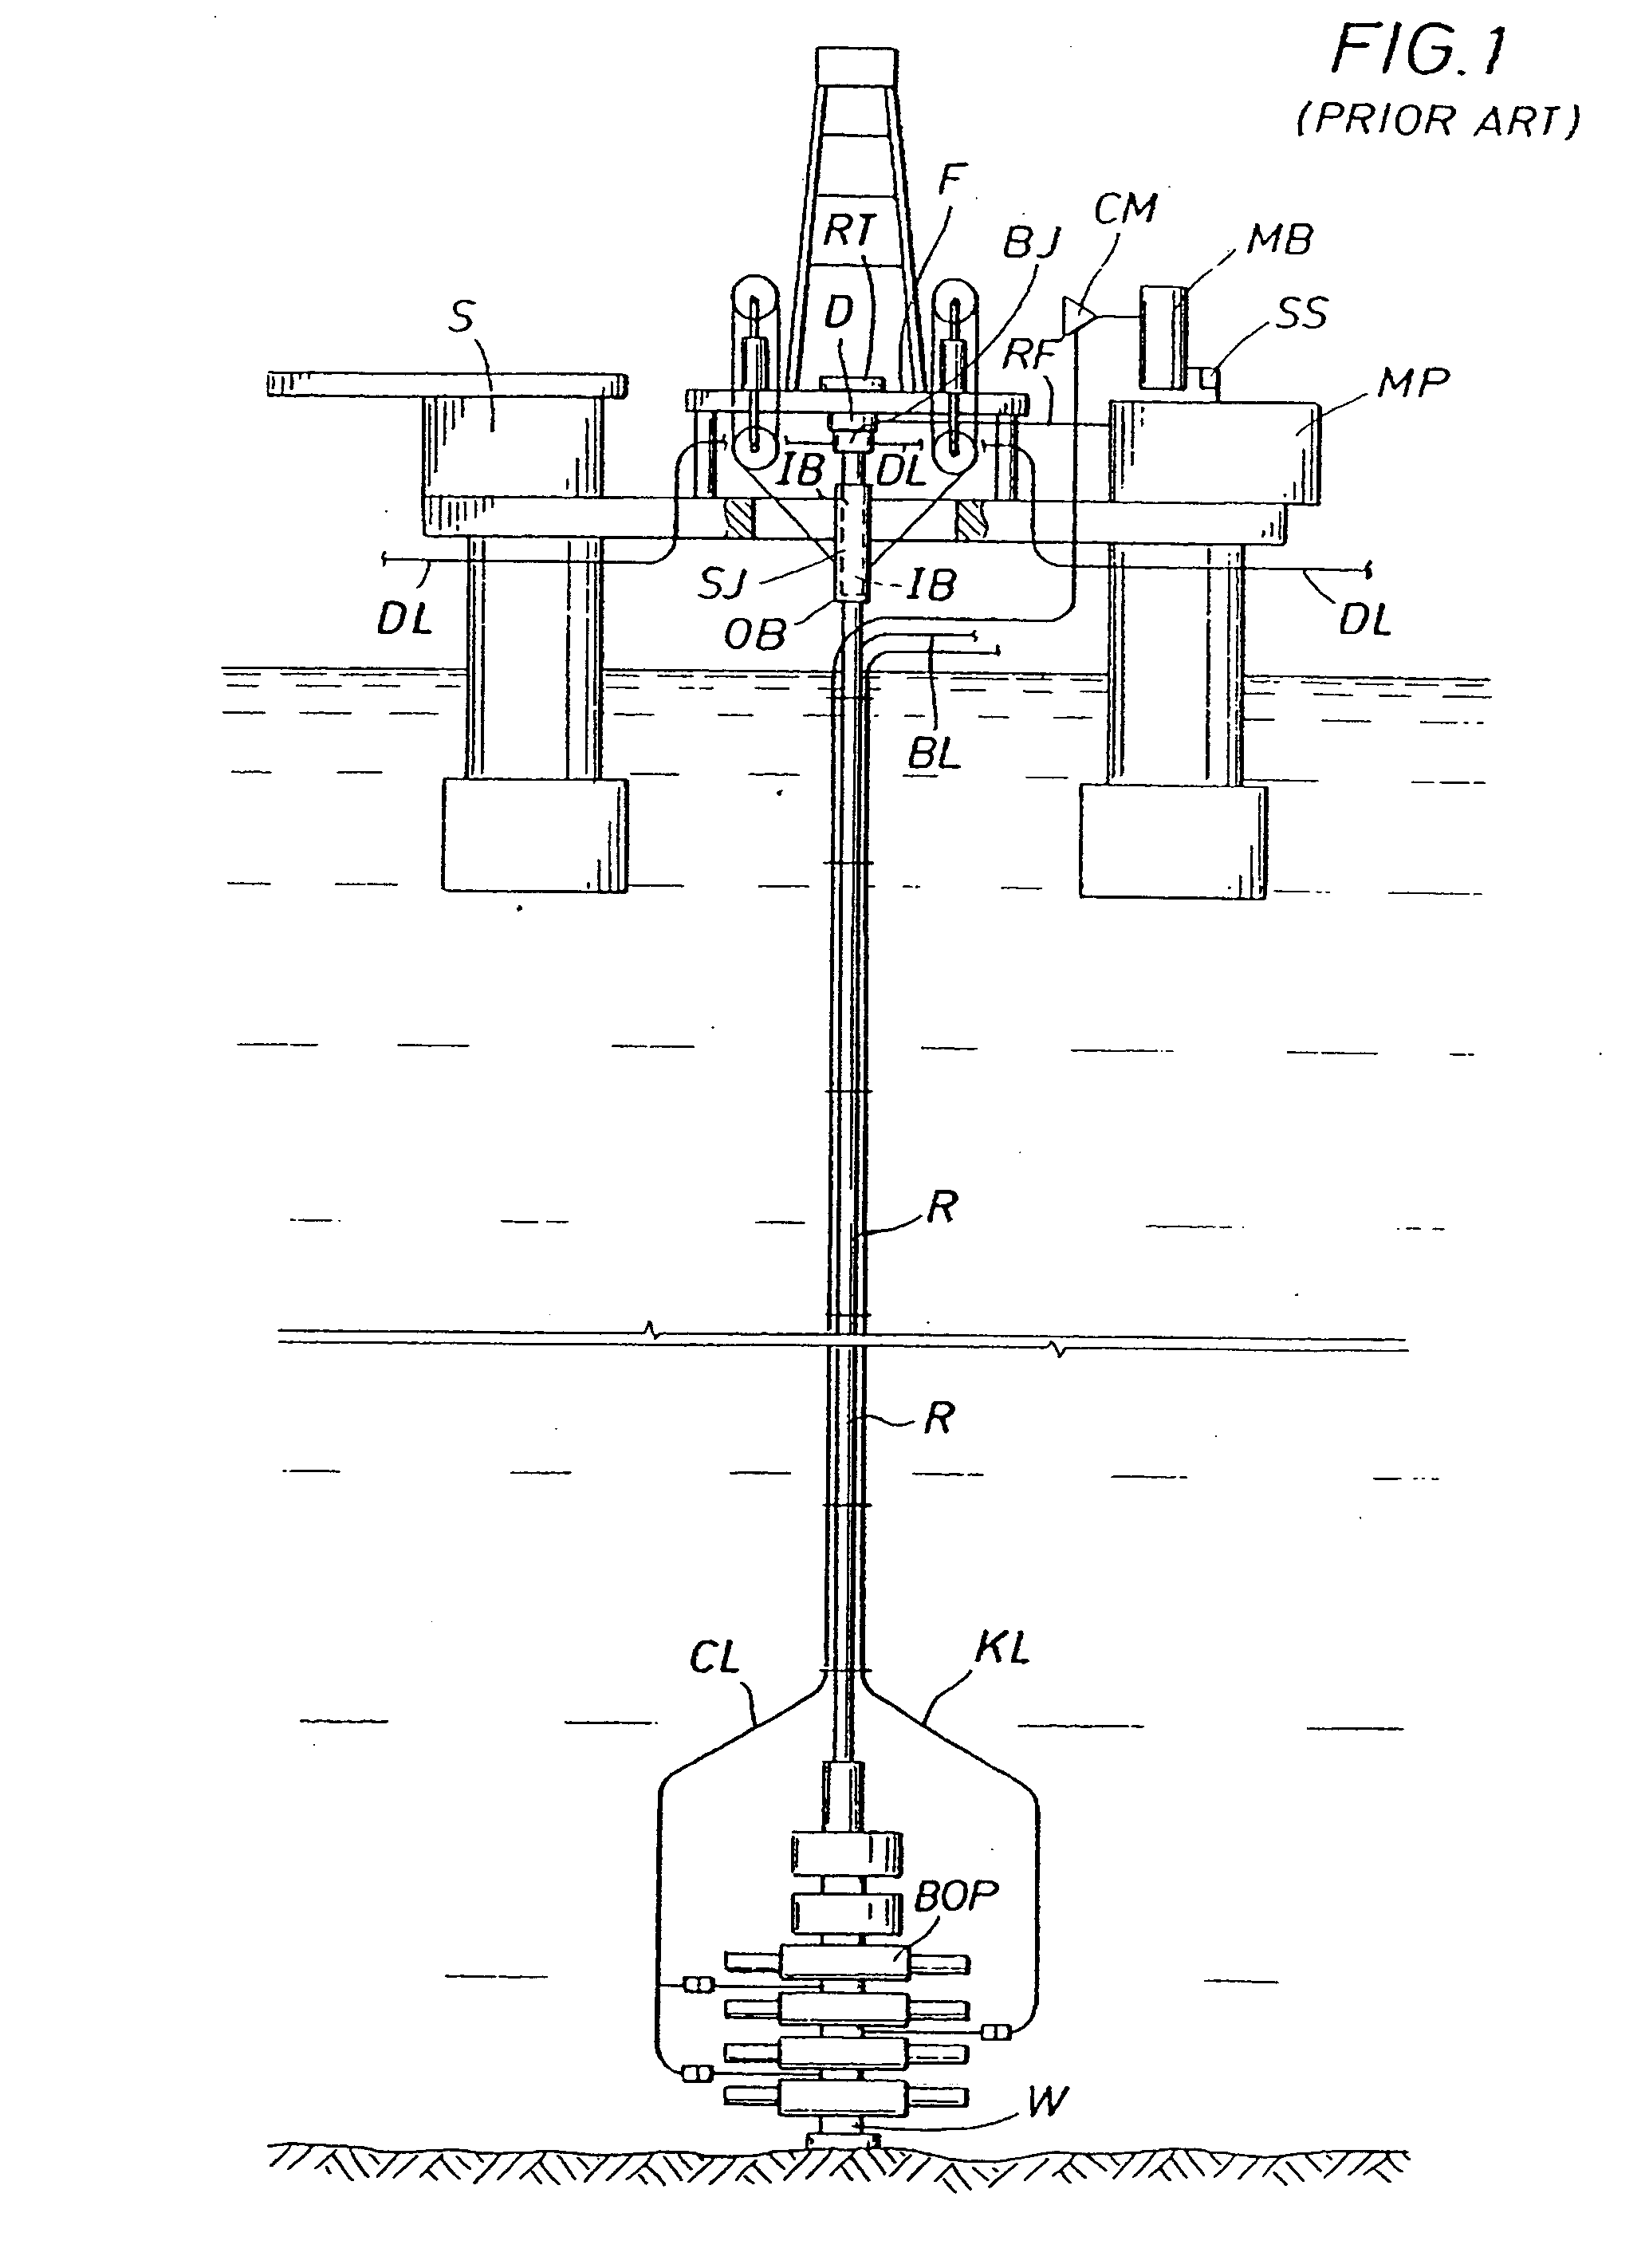 Method for pressurized mud cap and reverse circulation drilling from a floating drilling rig using a sealed marine riser